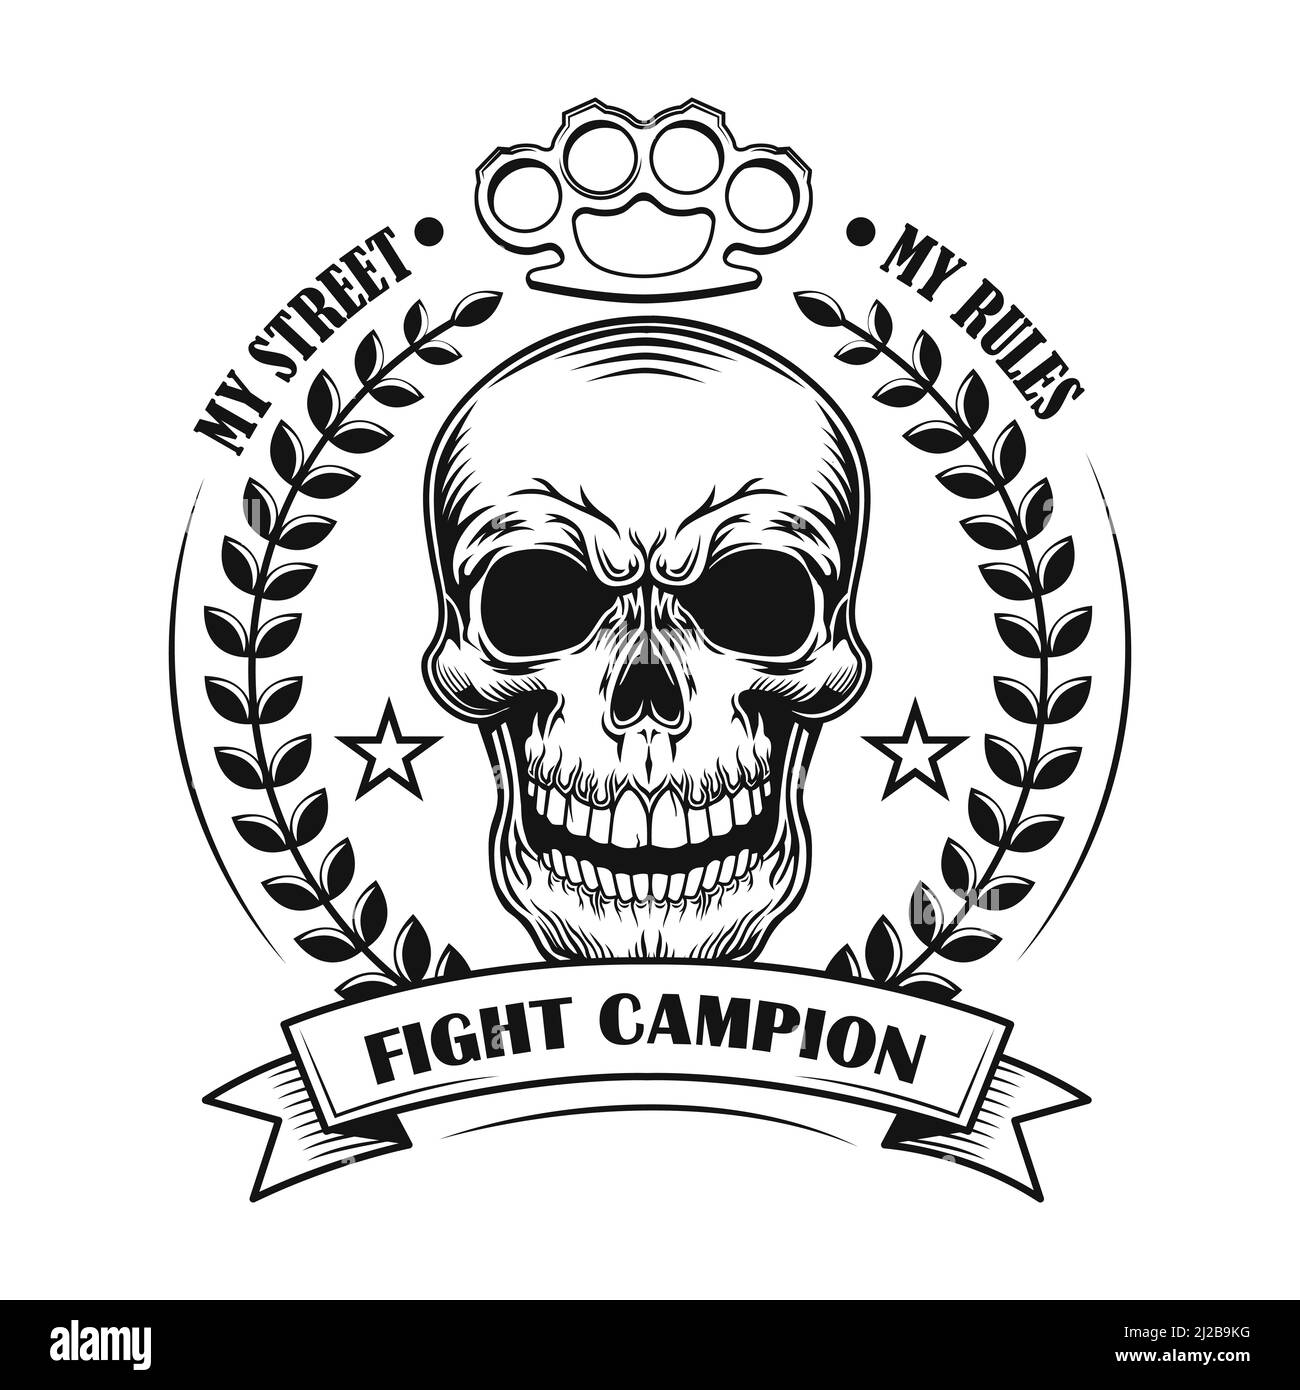 Street fight champion vector illustration. Skull of competition winner with award decoration and text. Fight club concept for community emblems or bad Stock Vector